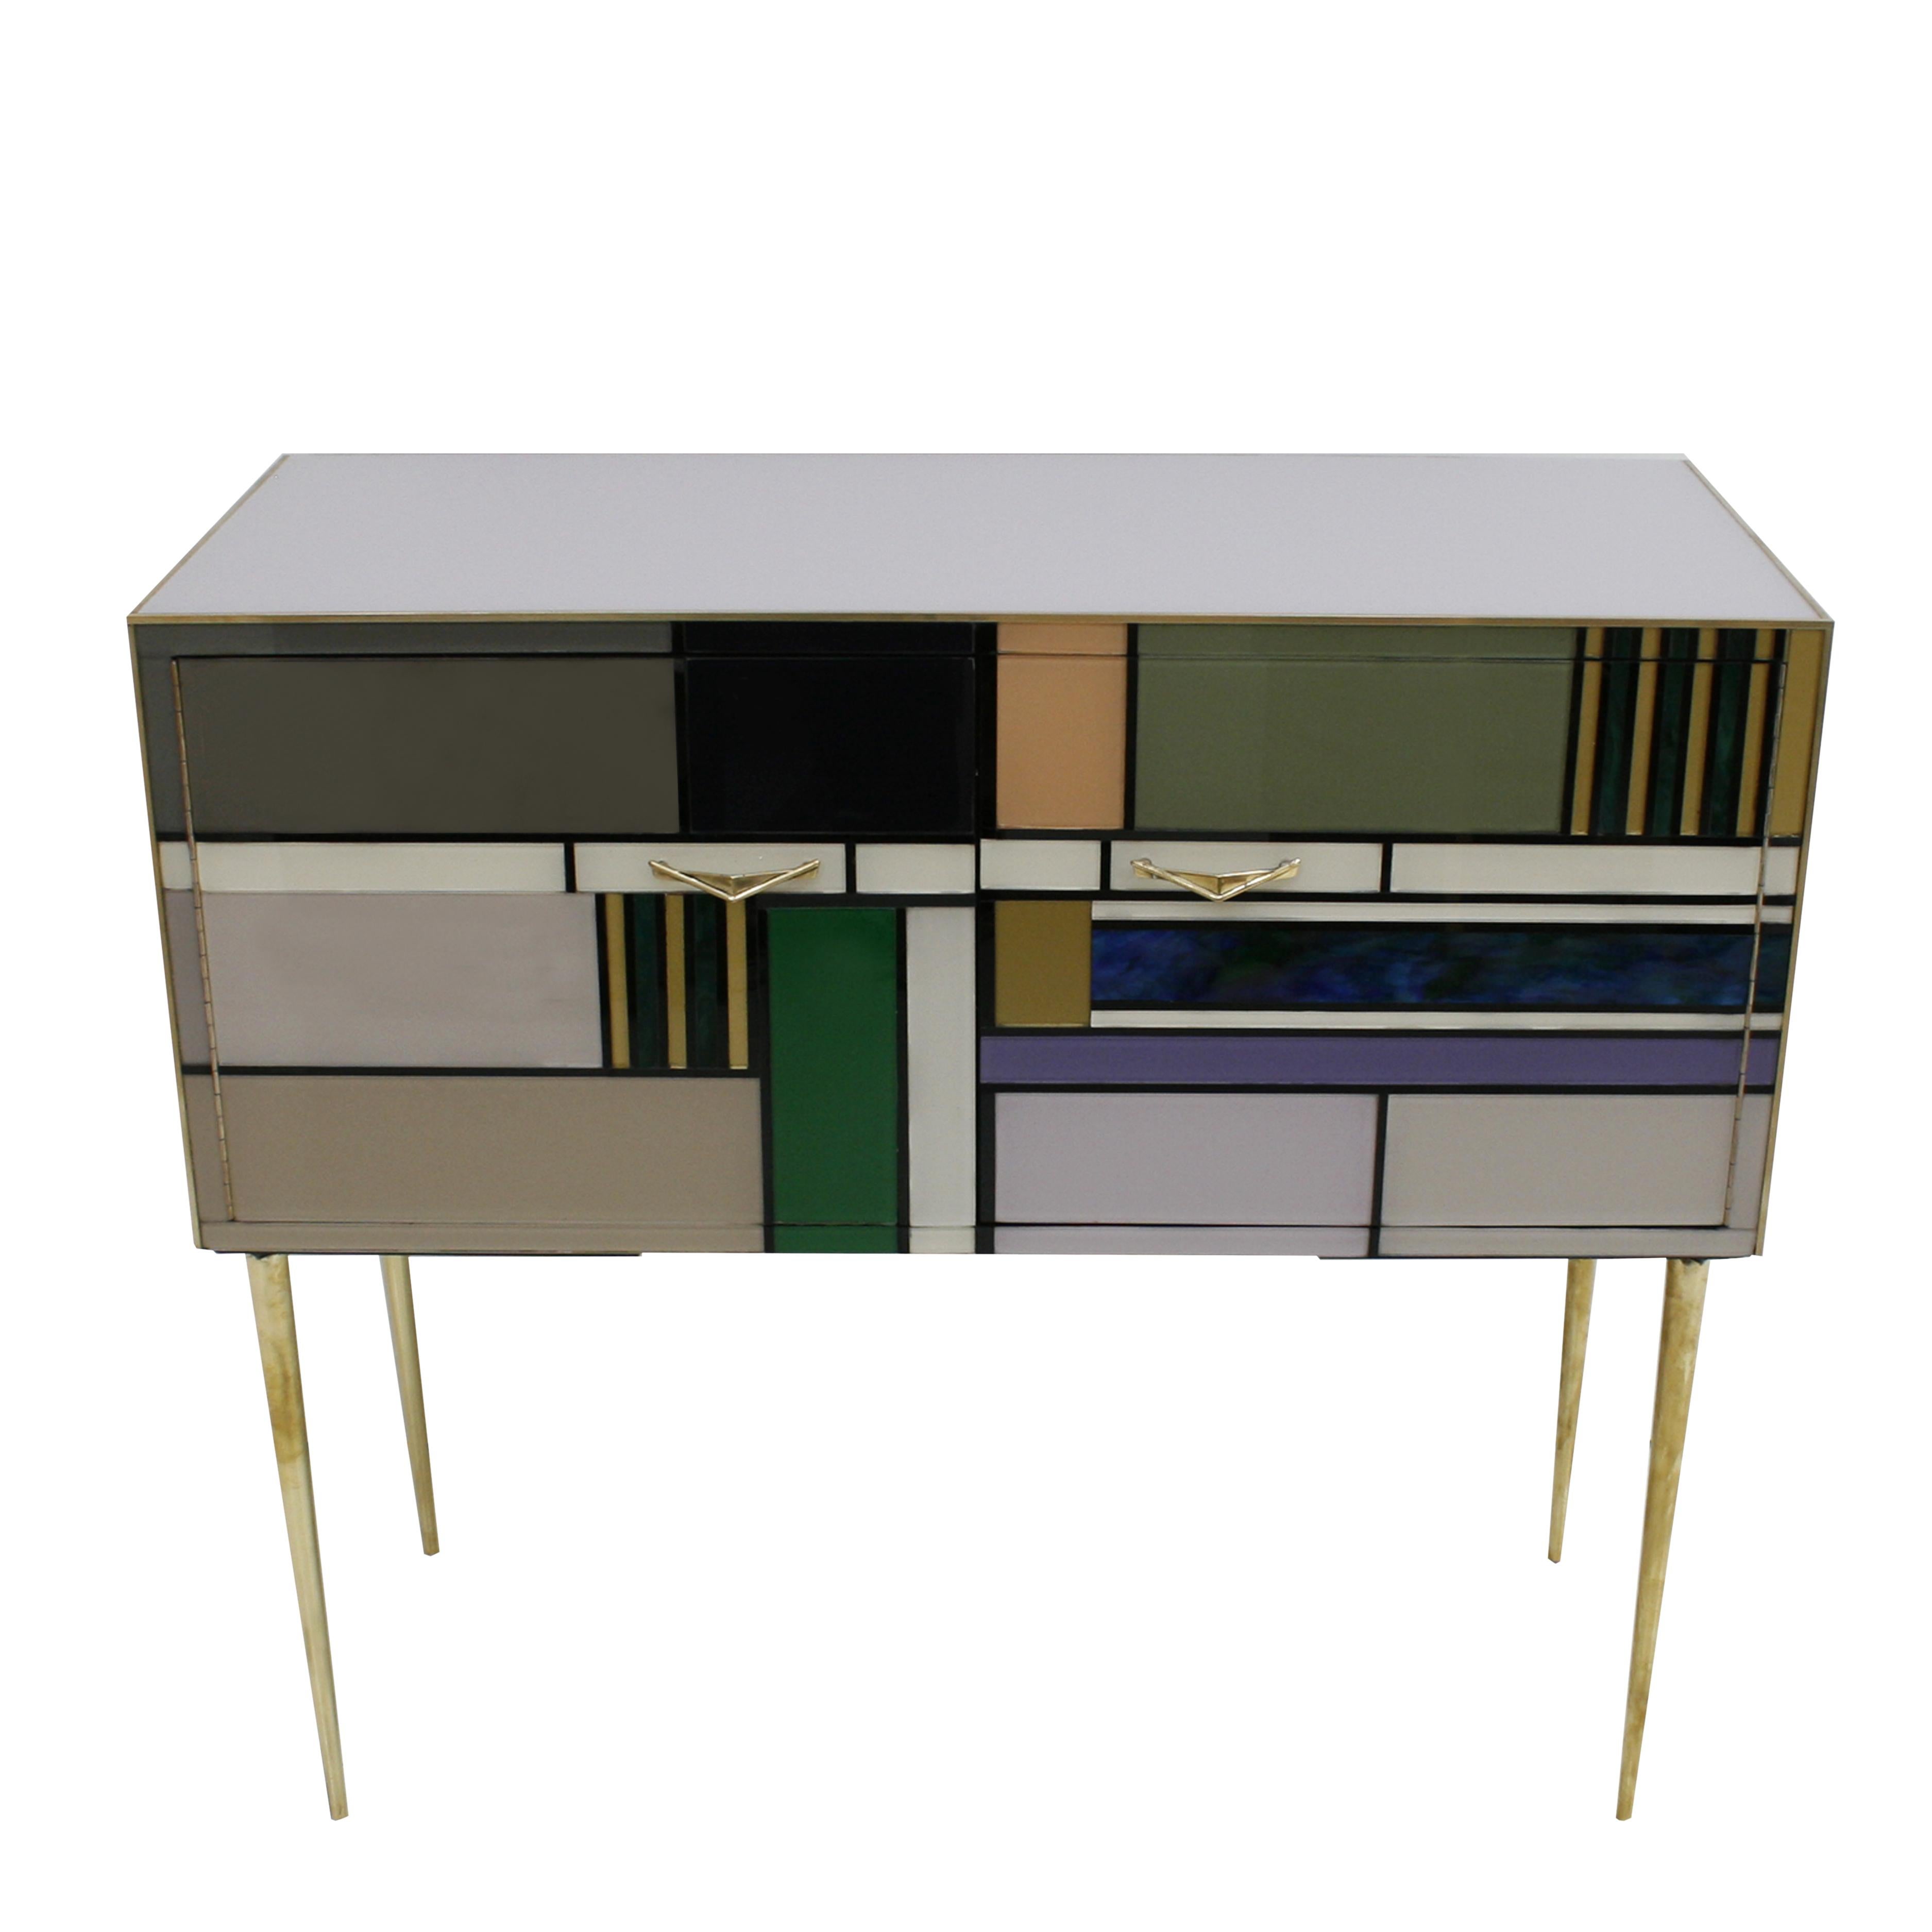 Pair of Italian sideboards with original structure from 50S composed of two folding doors. Structure made of solid wood covered in colored glass. Profiles, handles and legs are made of solid brass.

Take into account that the colors on the furniture